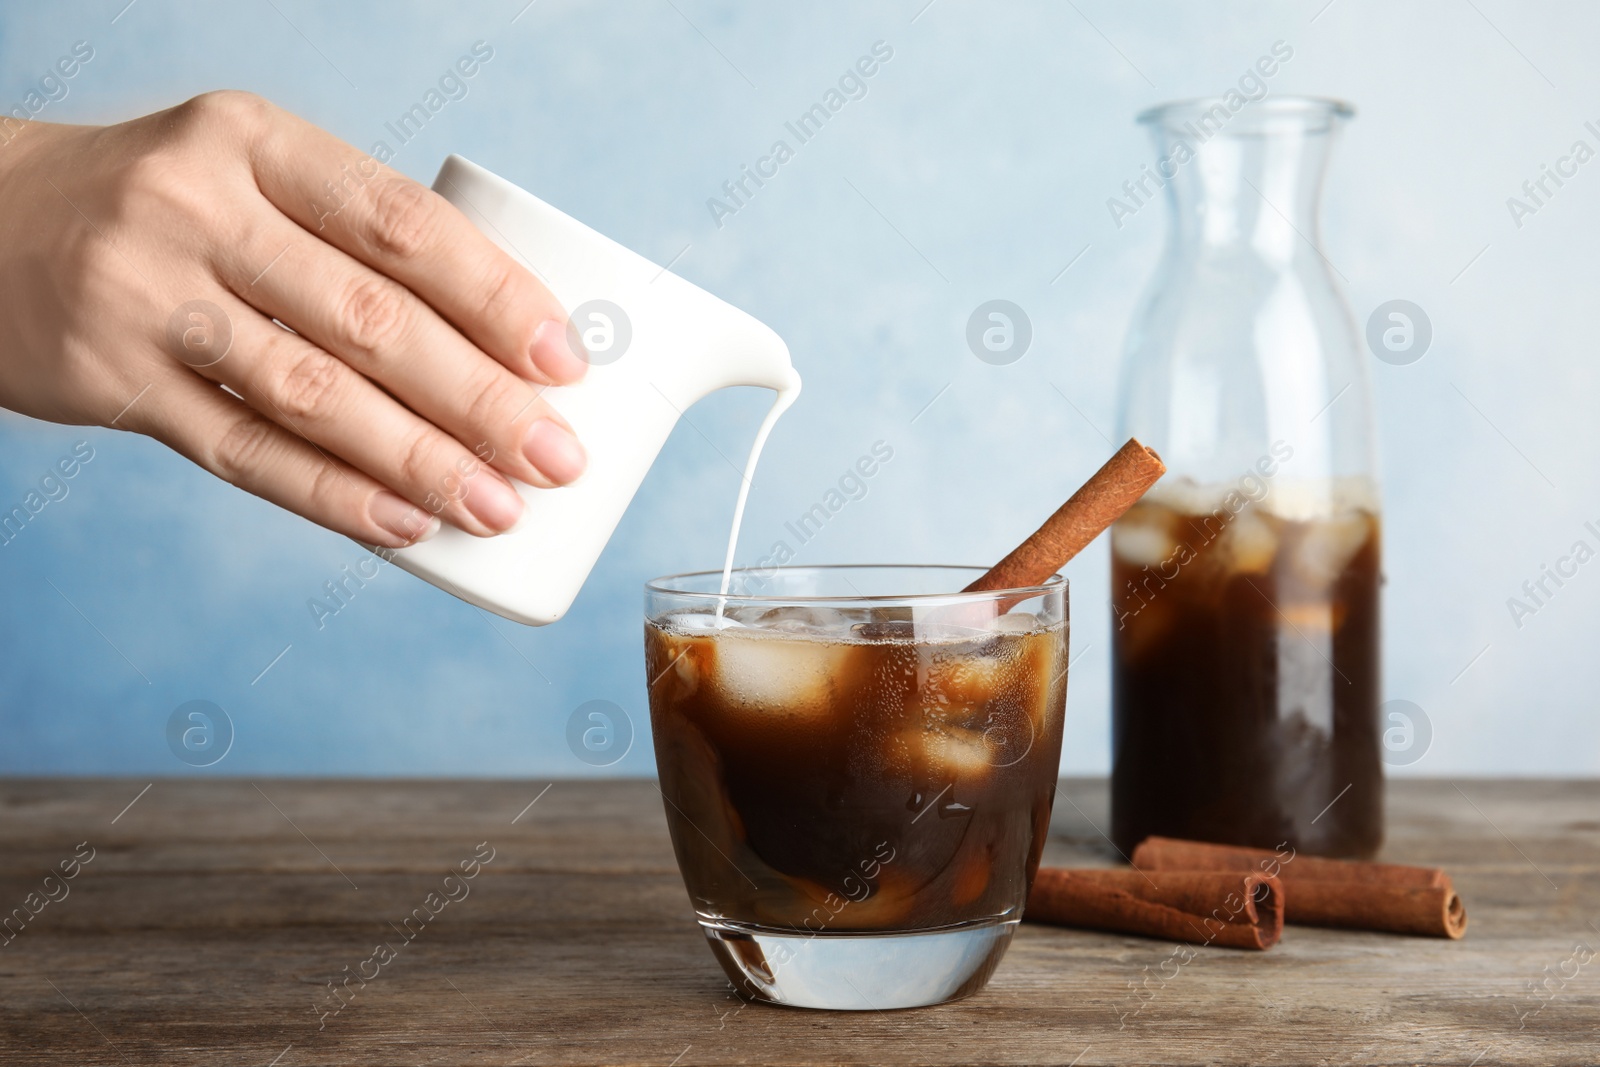 Photo of Woman pouring cream into glass of coffee with ice cubes on table against color background